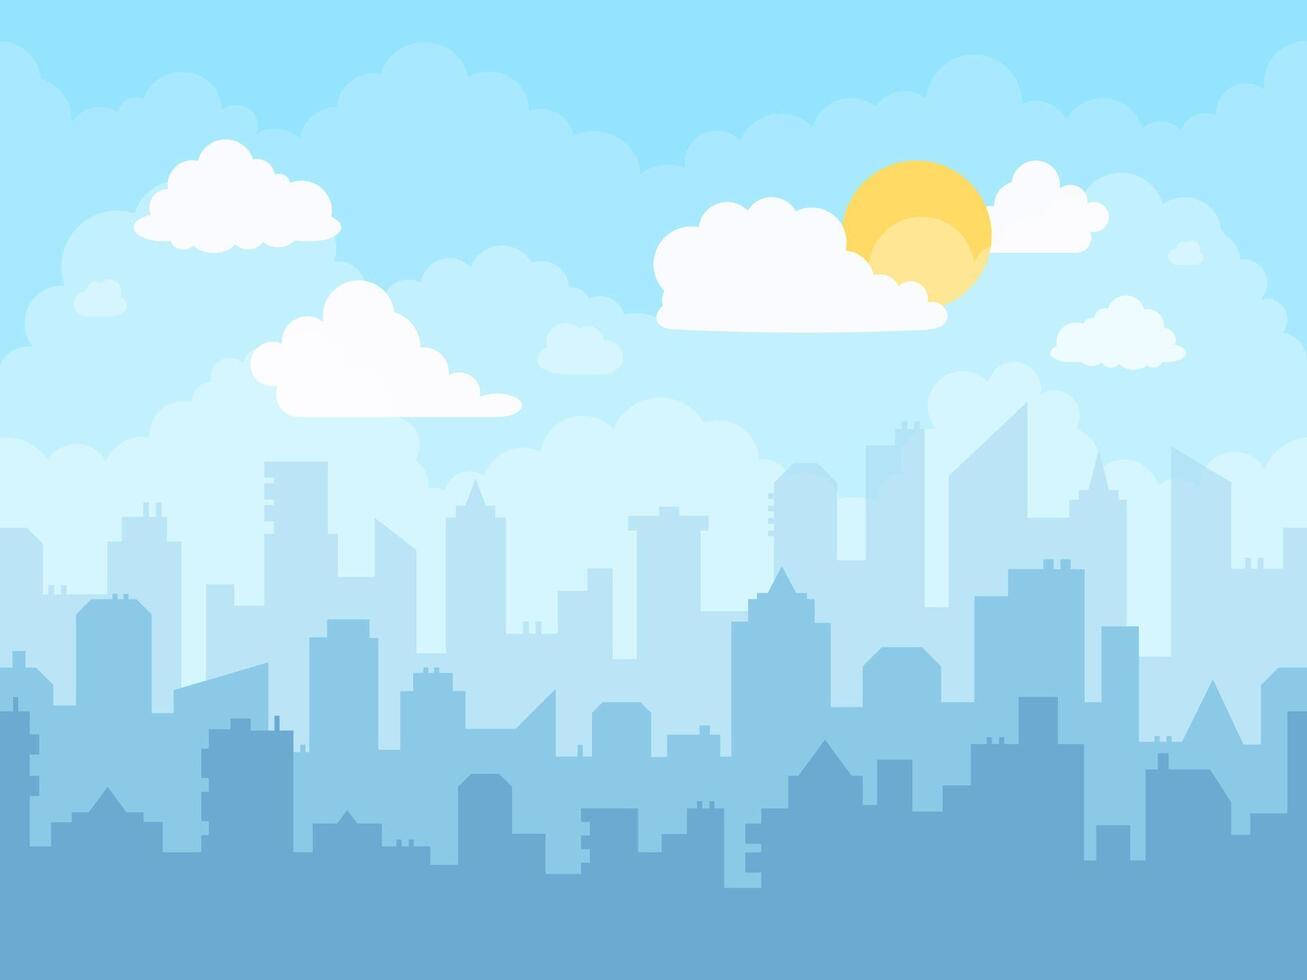 Cartoon blue sky cityscape. Cloudy sky, city skyline landscape, midday graphic urban silhouette cityscape illustration and town building layers bright vector background. Downtown skyscrapers view